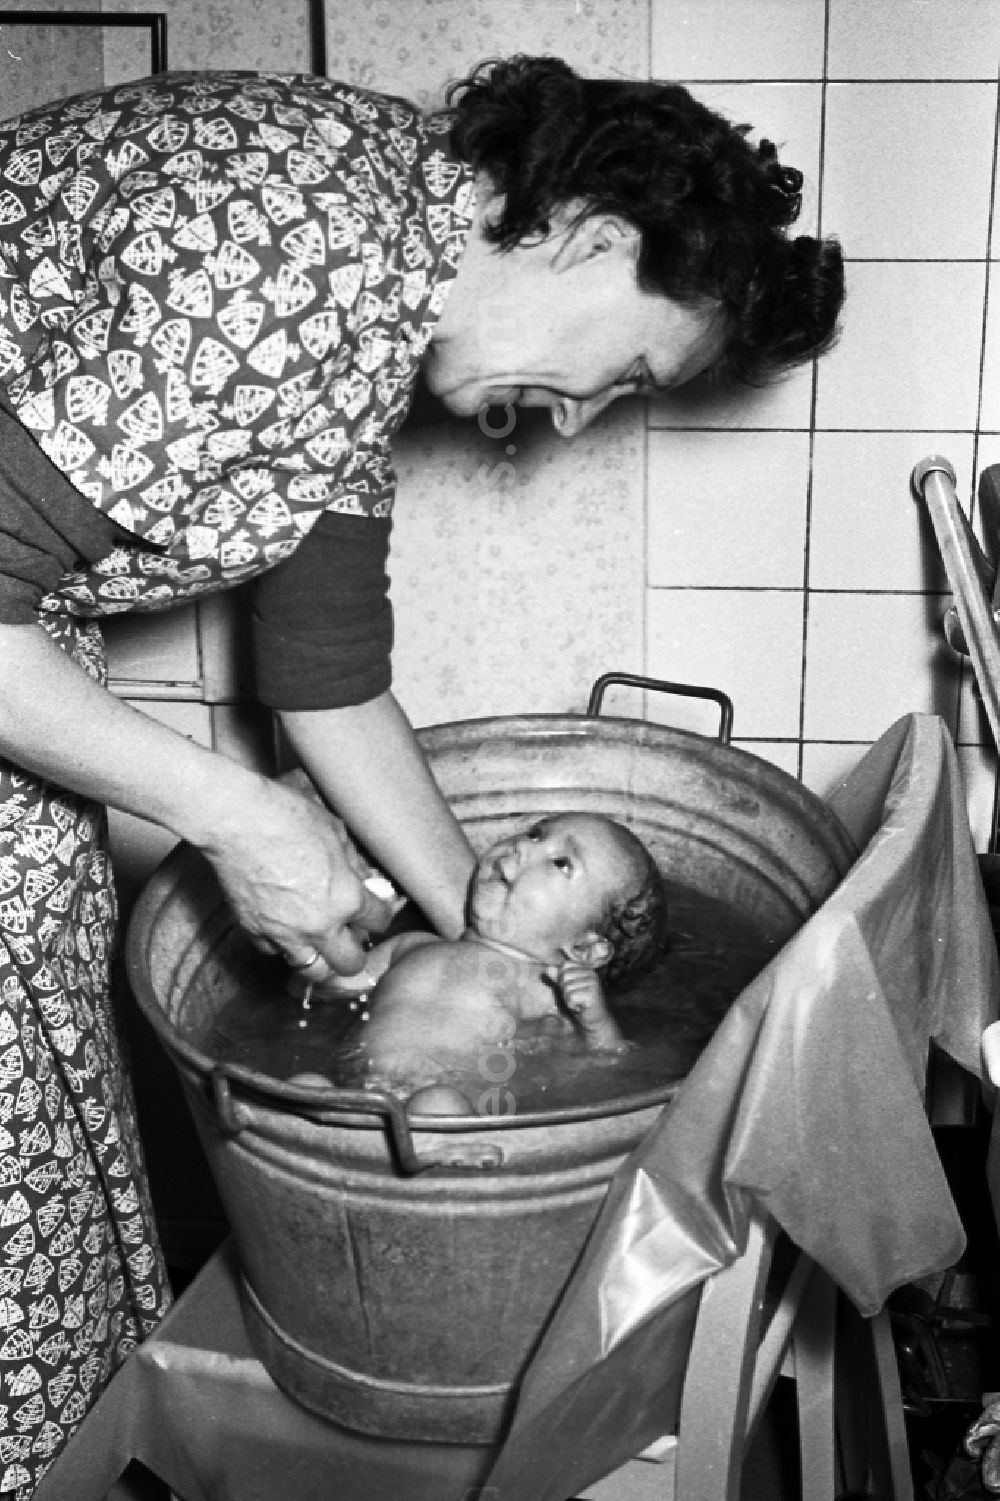 GDR picture archive: Merseburg - A woman in smock apron bathes a baby in a zinc tub in Merseburg in the federal state Saxony-Anhalt in the area of the former GDR, German democratic republic